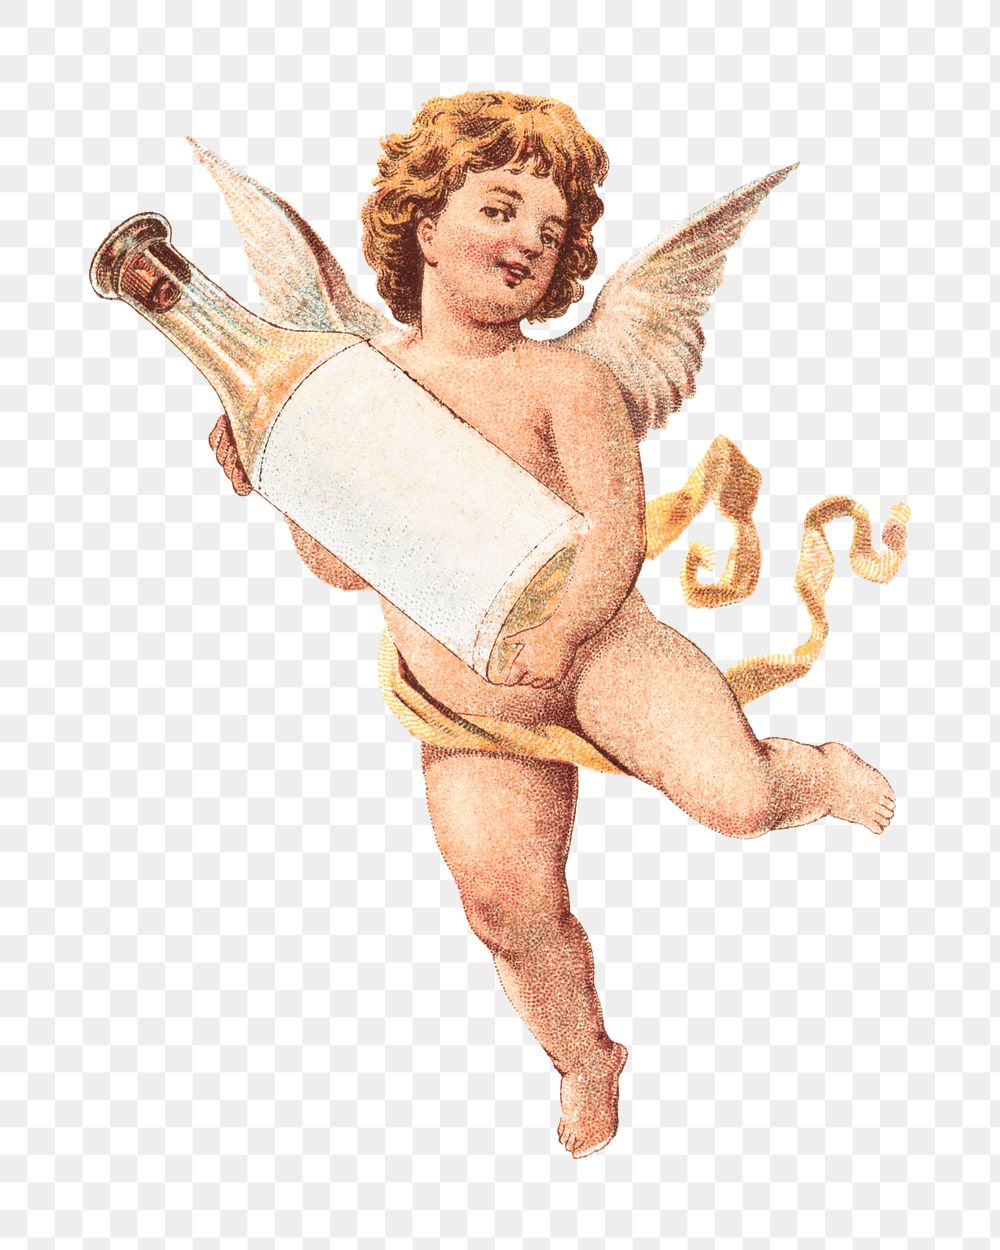 Cherub png holding perfume bottle, vintage illustration on transparent background. Remixed by rawpixel.